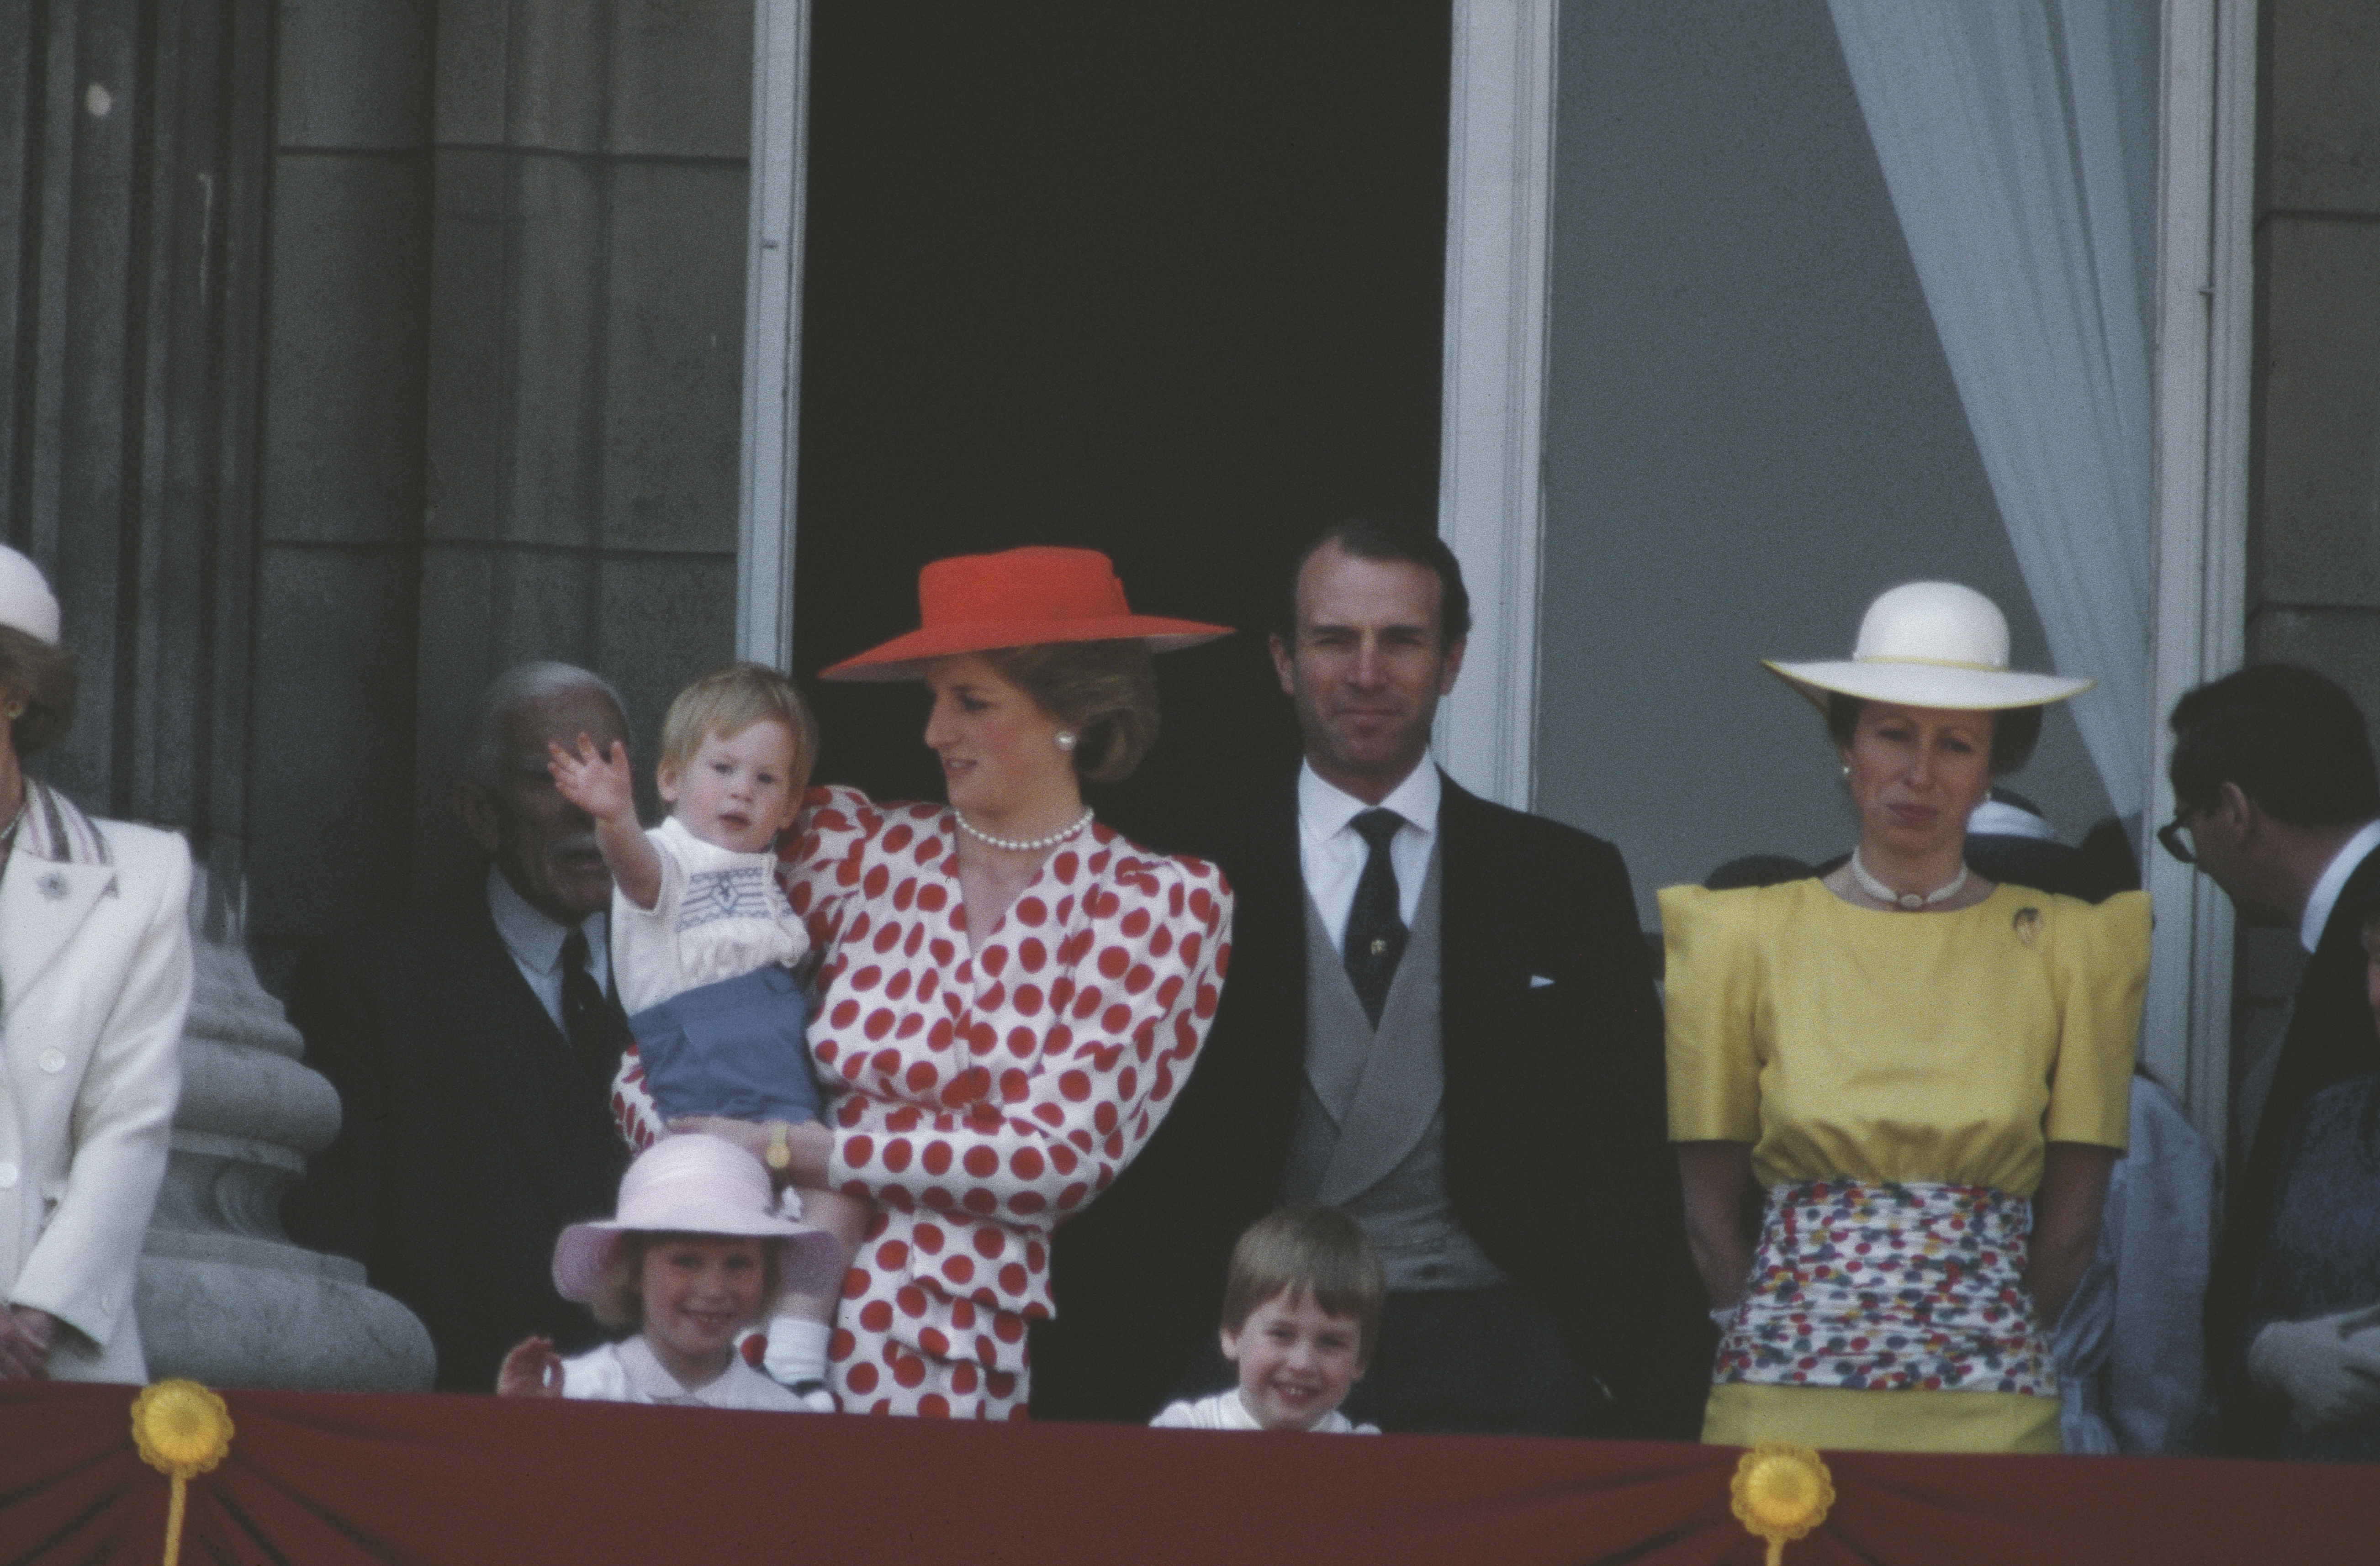 Princess Diana holding Prince Harry with Prince William, Princess Anne and Mark Phillips on the balcony for the Trooping the Colour ceremony in June 1986. | Source: Getty Images